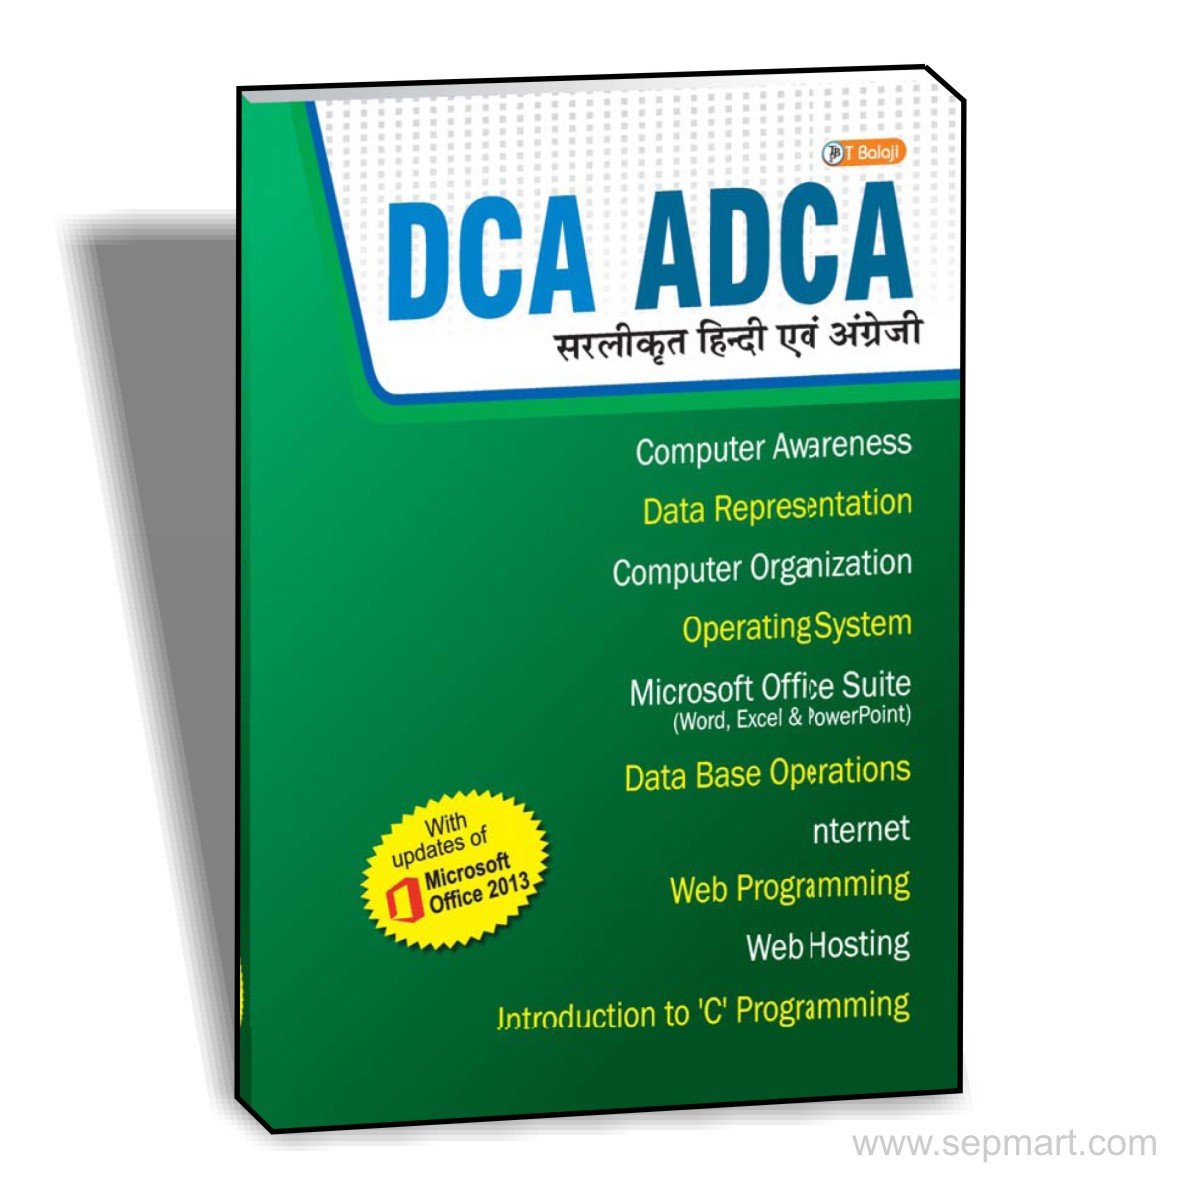 (ADCA) ADVANCE DIPLOMA IN COMPUTER APPLICATION